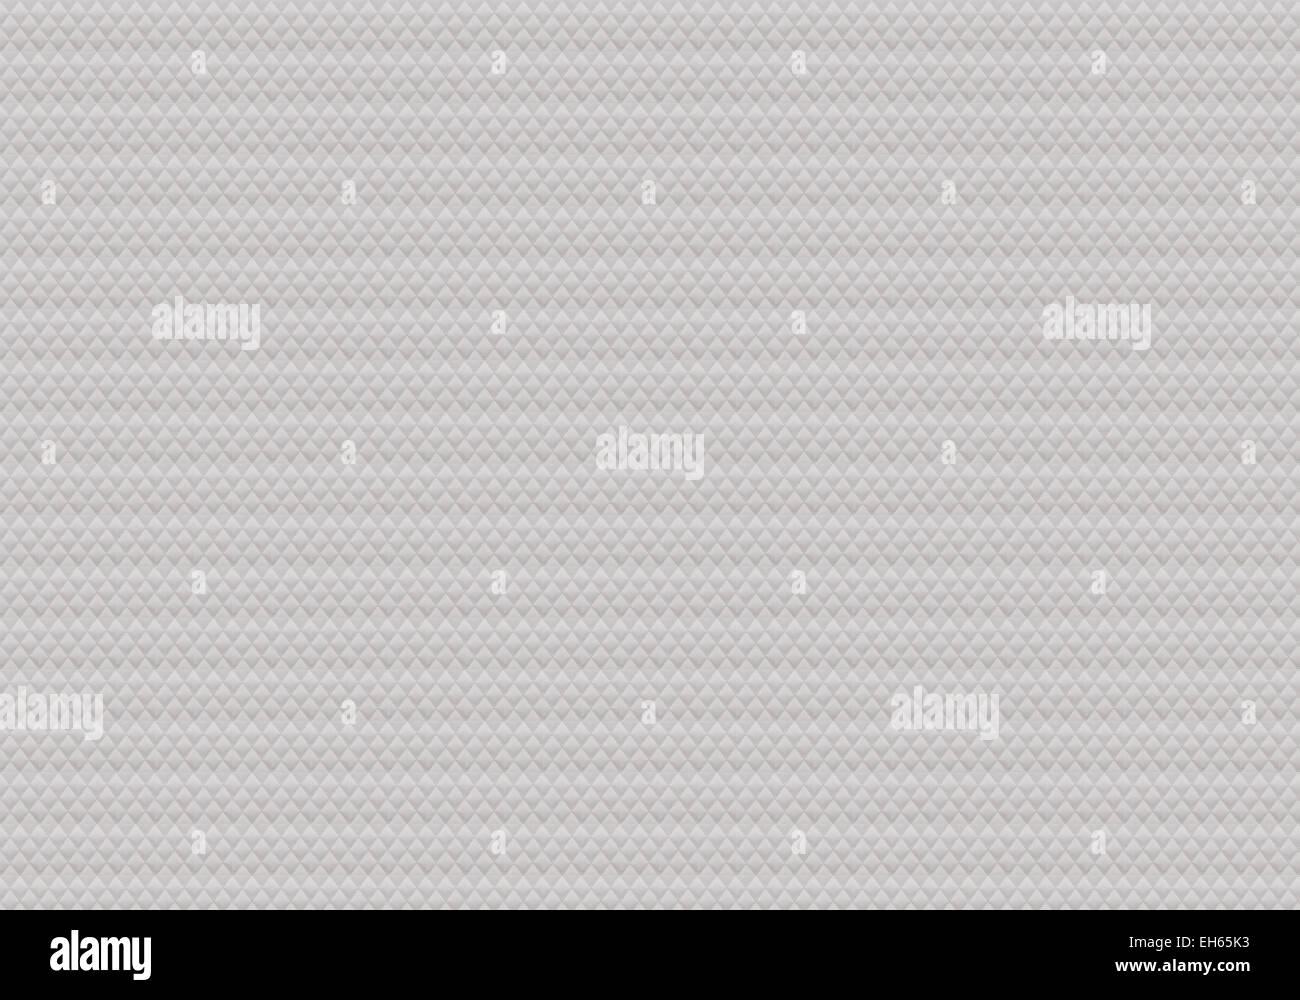 Abstract gray background with a pattern. Stock Photo